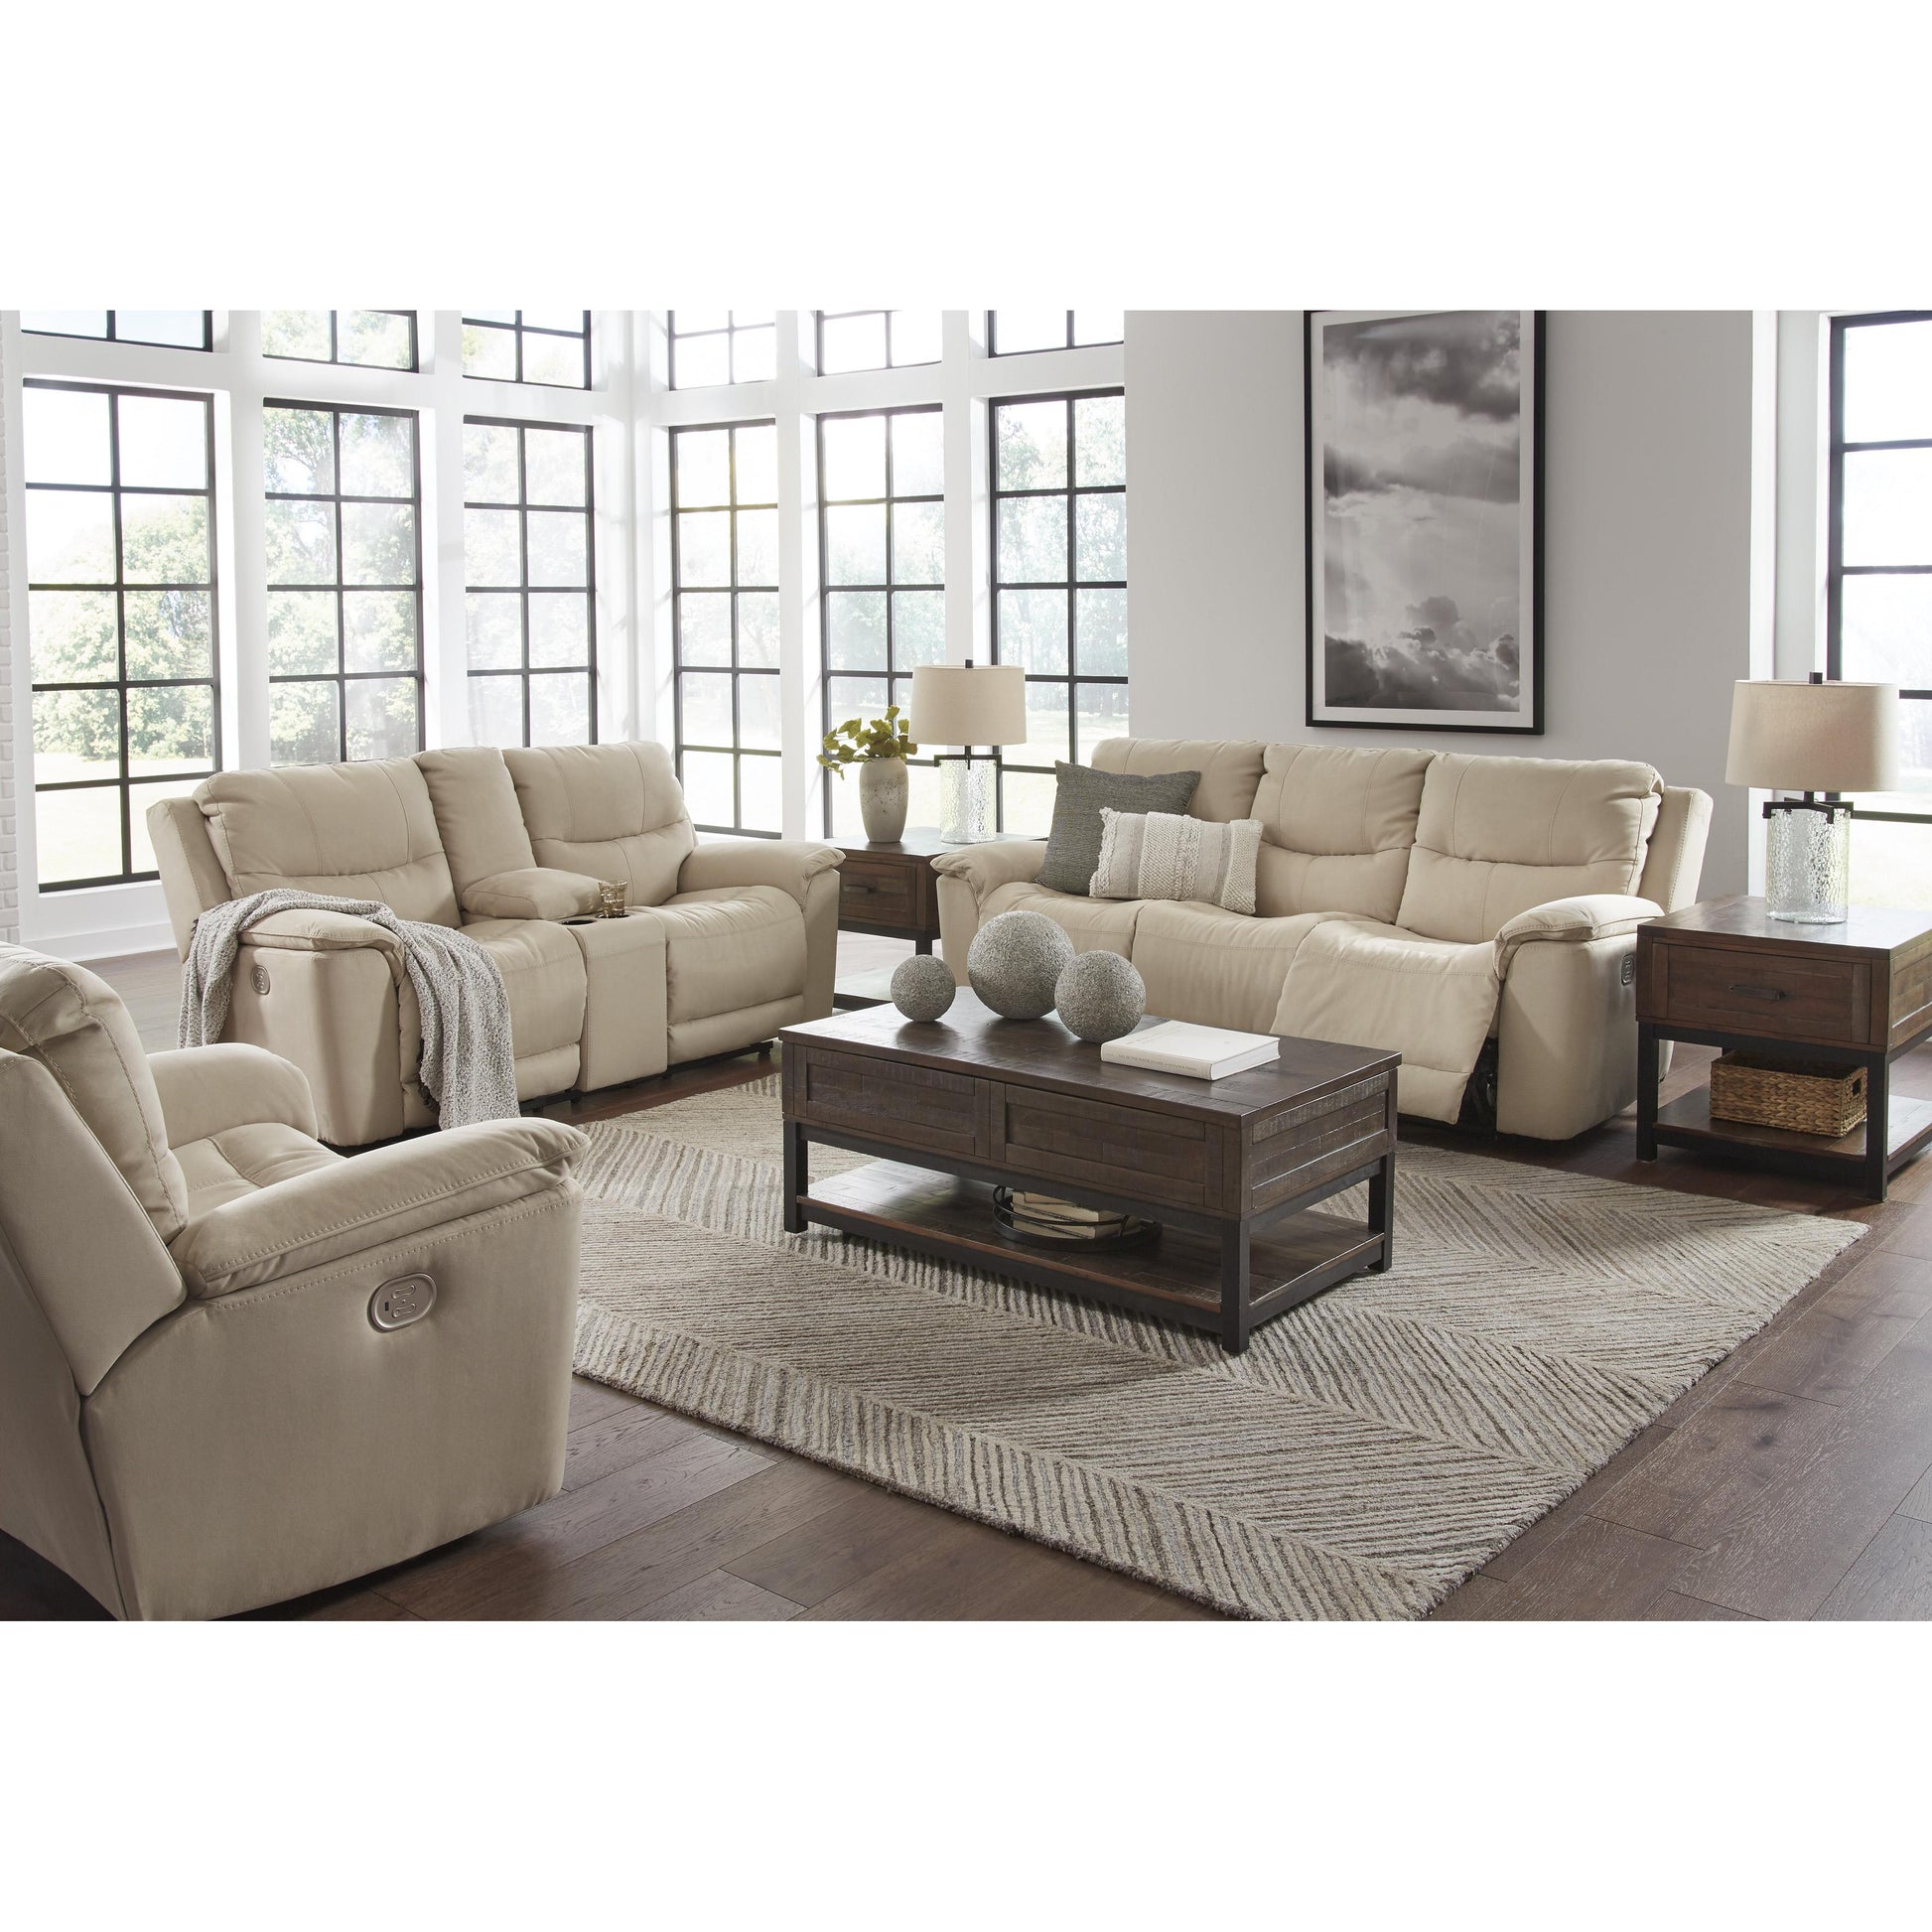 Signature Design by Ashley Next-Gen Gaucho Power Reclining Leather Look Loveseat 6080718 IMAGE 13